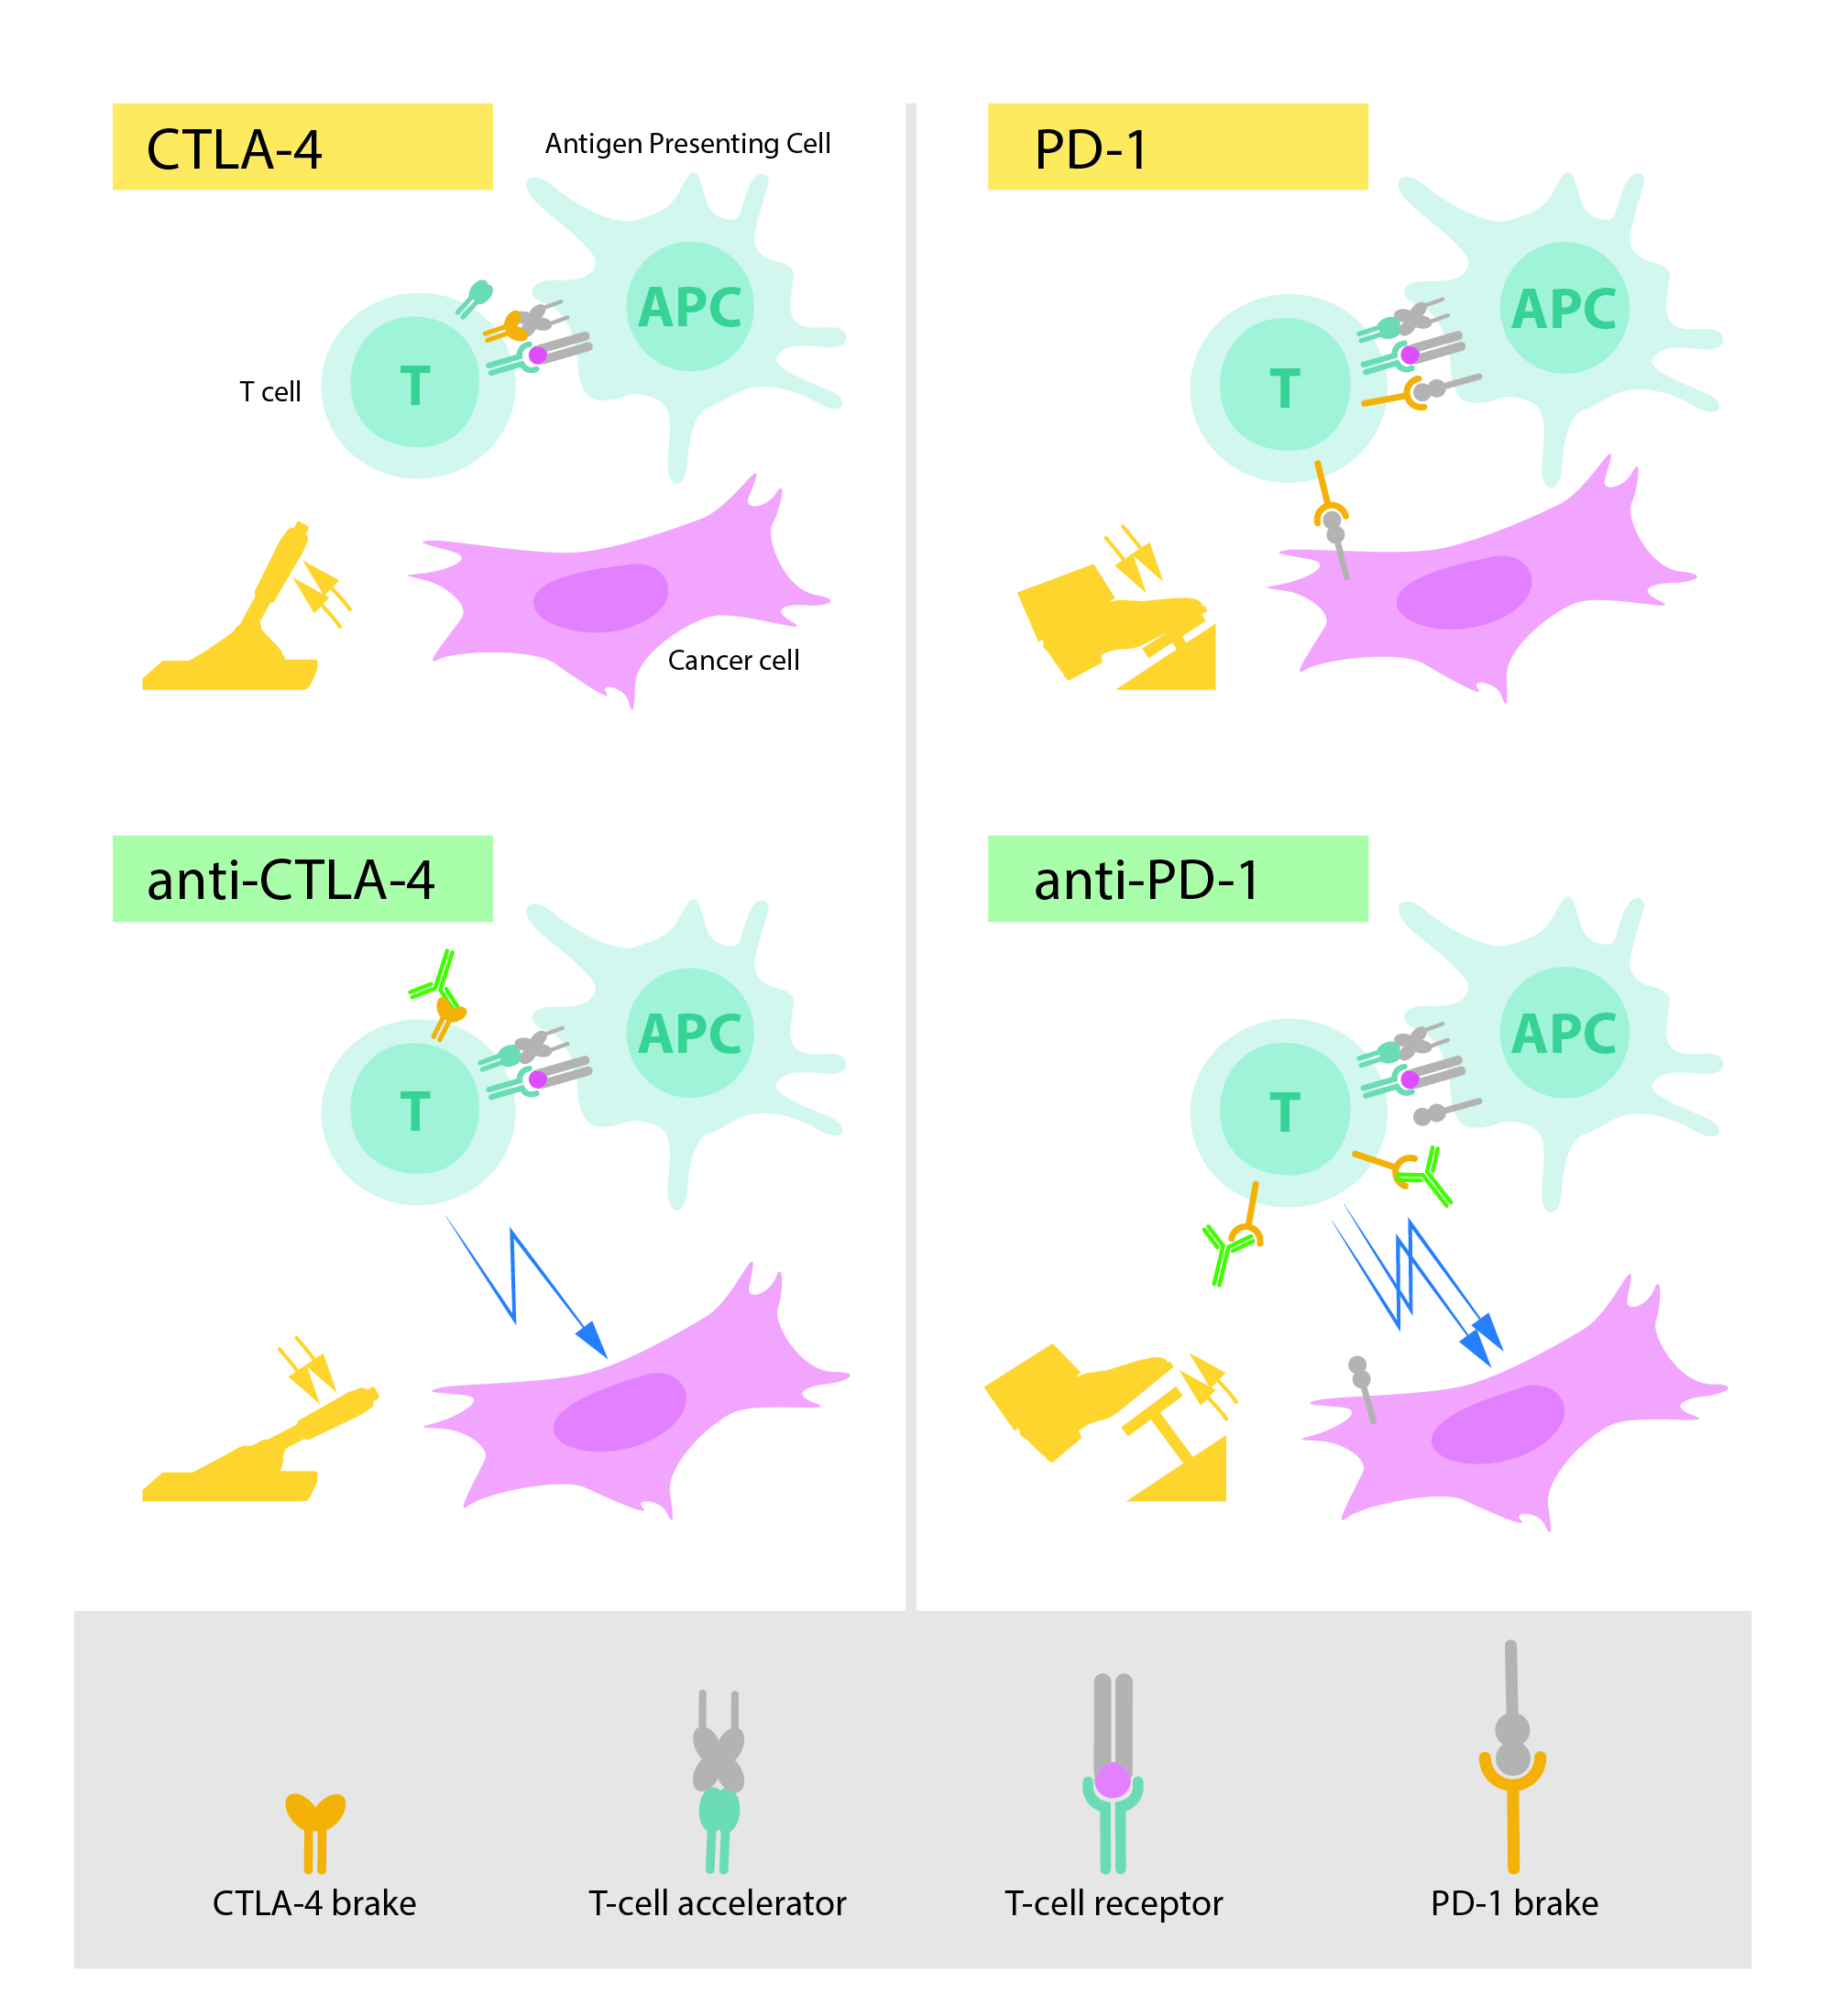 Upper left: Activation of T cells requires that the T-cell receptor binds to structures on other immune cells recognized as ”non-self”. A protein functioning as a T-cell accelerator is also required for T cell activation. CTLA- 4 functions as a brake on T cells that inhibits the function of the accelerator. Lower left: Antibodies (green) against CTLA-4 block the function of the brake leading to activation of T cells and attack on cancer cells.Upper right: PD-1 is another T-cell brake that inhibits T-cell activation. Lower right: Antibodies against PD-1 inhibit the function of the brake leading to activation of T cells and highly efficient attack on cancer cells. [nobelprize.org]